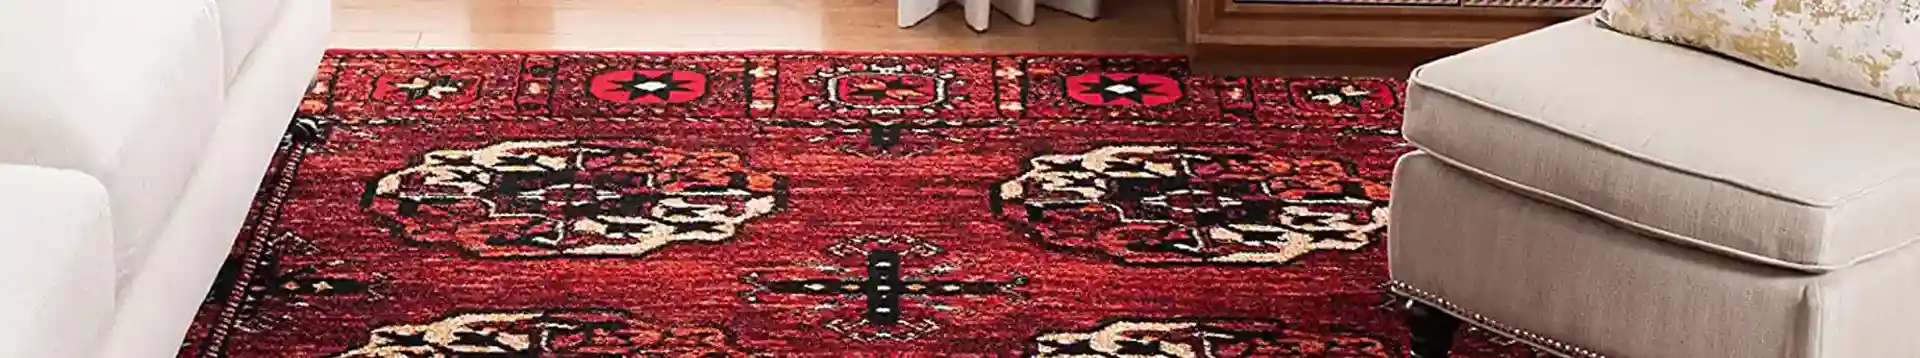 Rug Cleaning Video Gallery, Fort Lauderdale